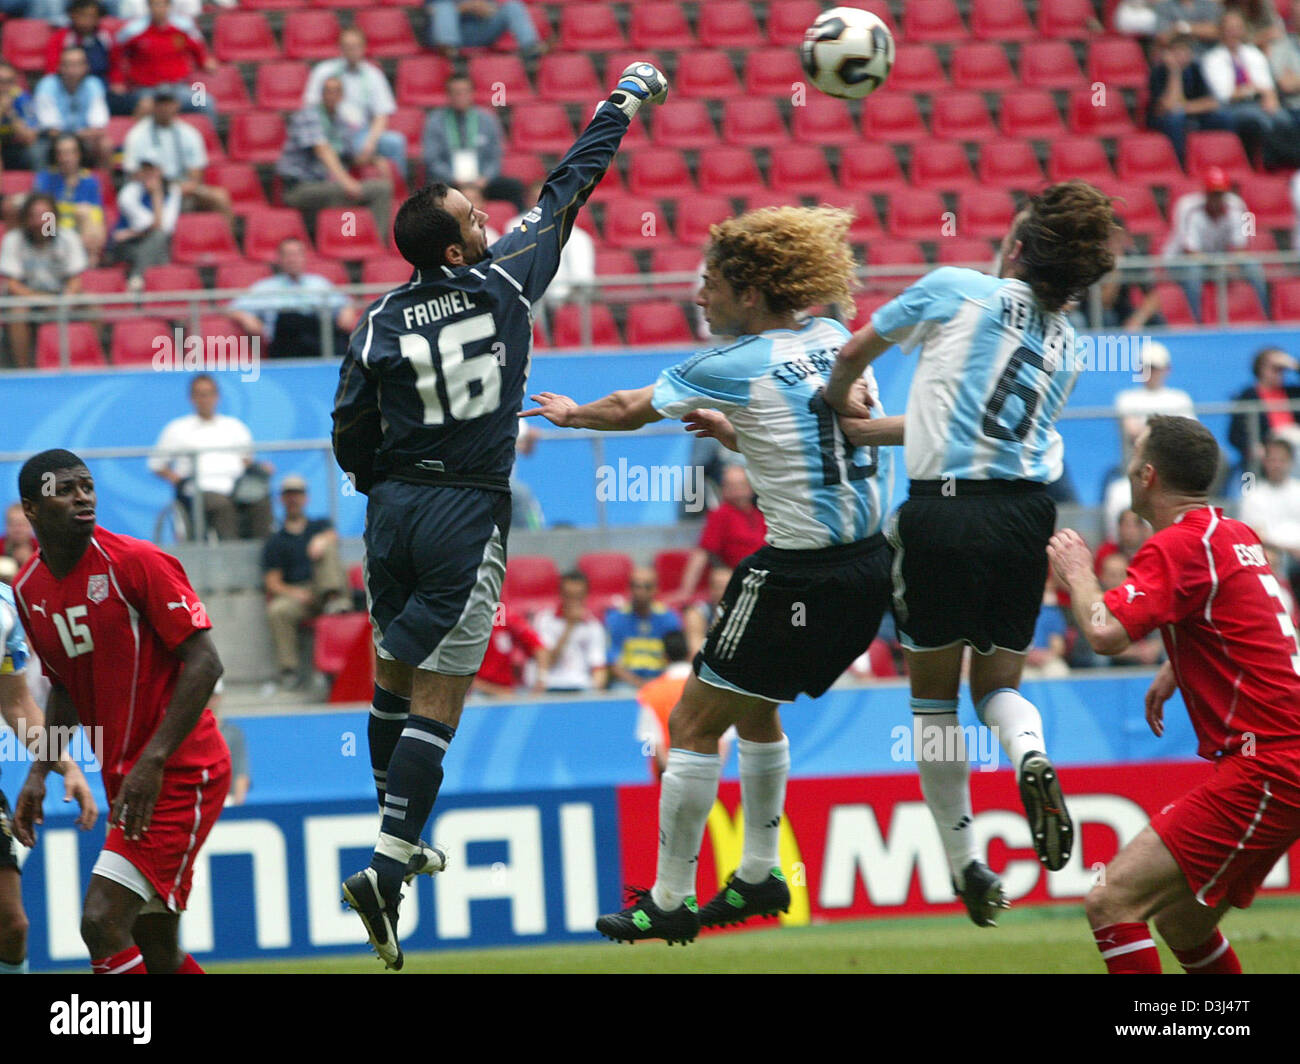 (dpa) - Tunesian goalie Khaled Fadhel (2nd L) tries to get the ball in a struggle with Argentina's soccer players Fabricio Coloccini (C) and Gabriel Heinze (2nd R) during the opening match of the Confederations Cup tournament Argentina vs Tunesia in Cologne, Germany, Wednesday 15 June 2005. Stock Photo